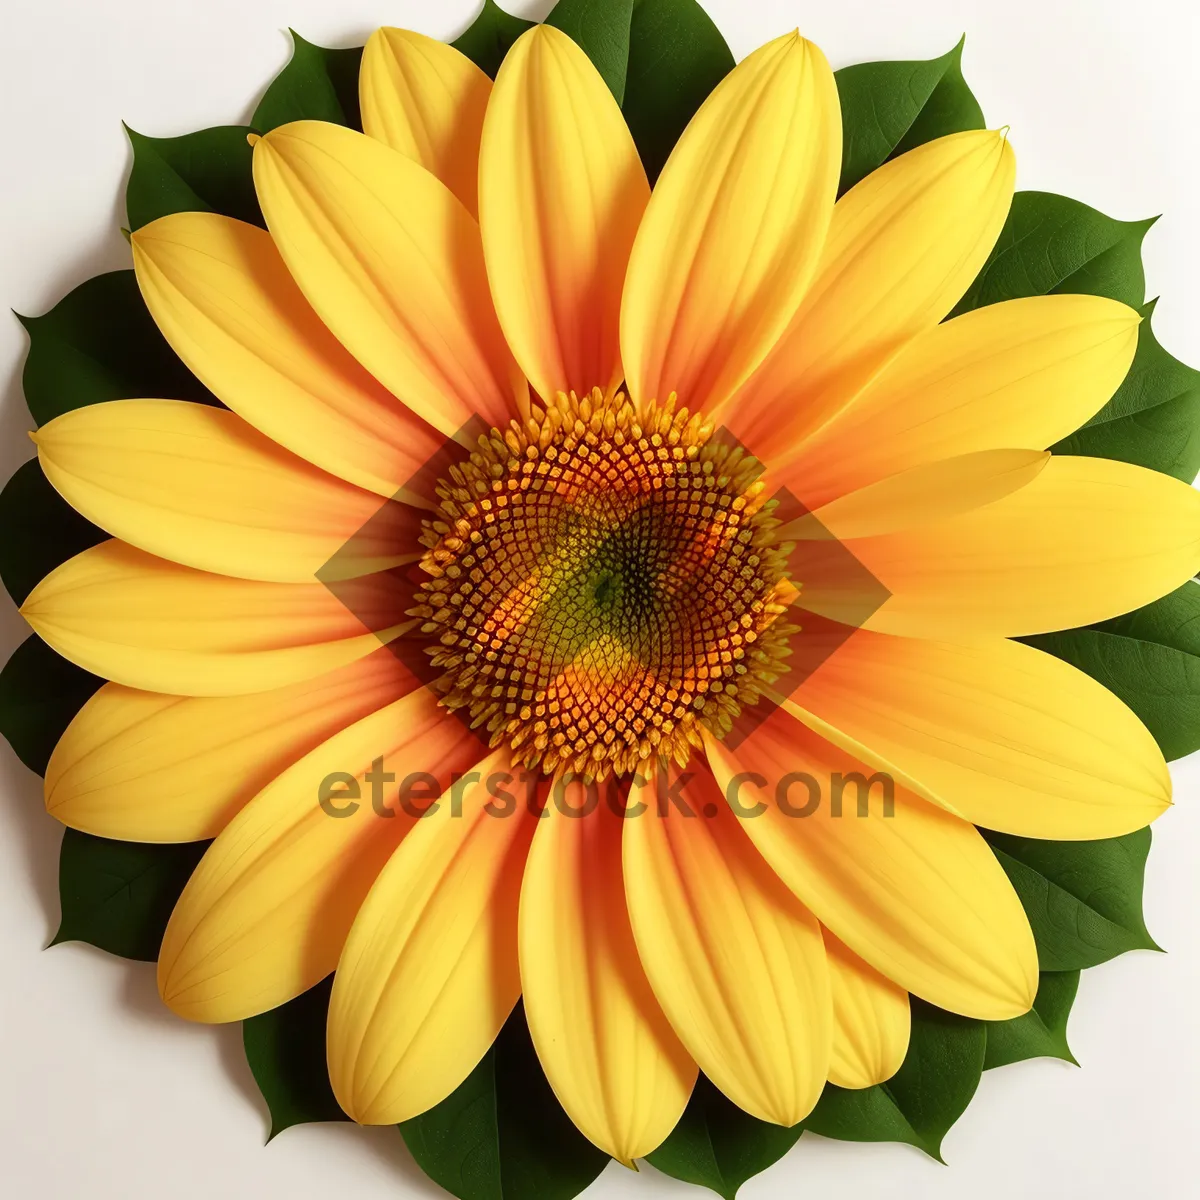 Picture of Bright Yellow Sunflower Blossom in Full Bloom